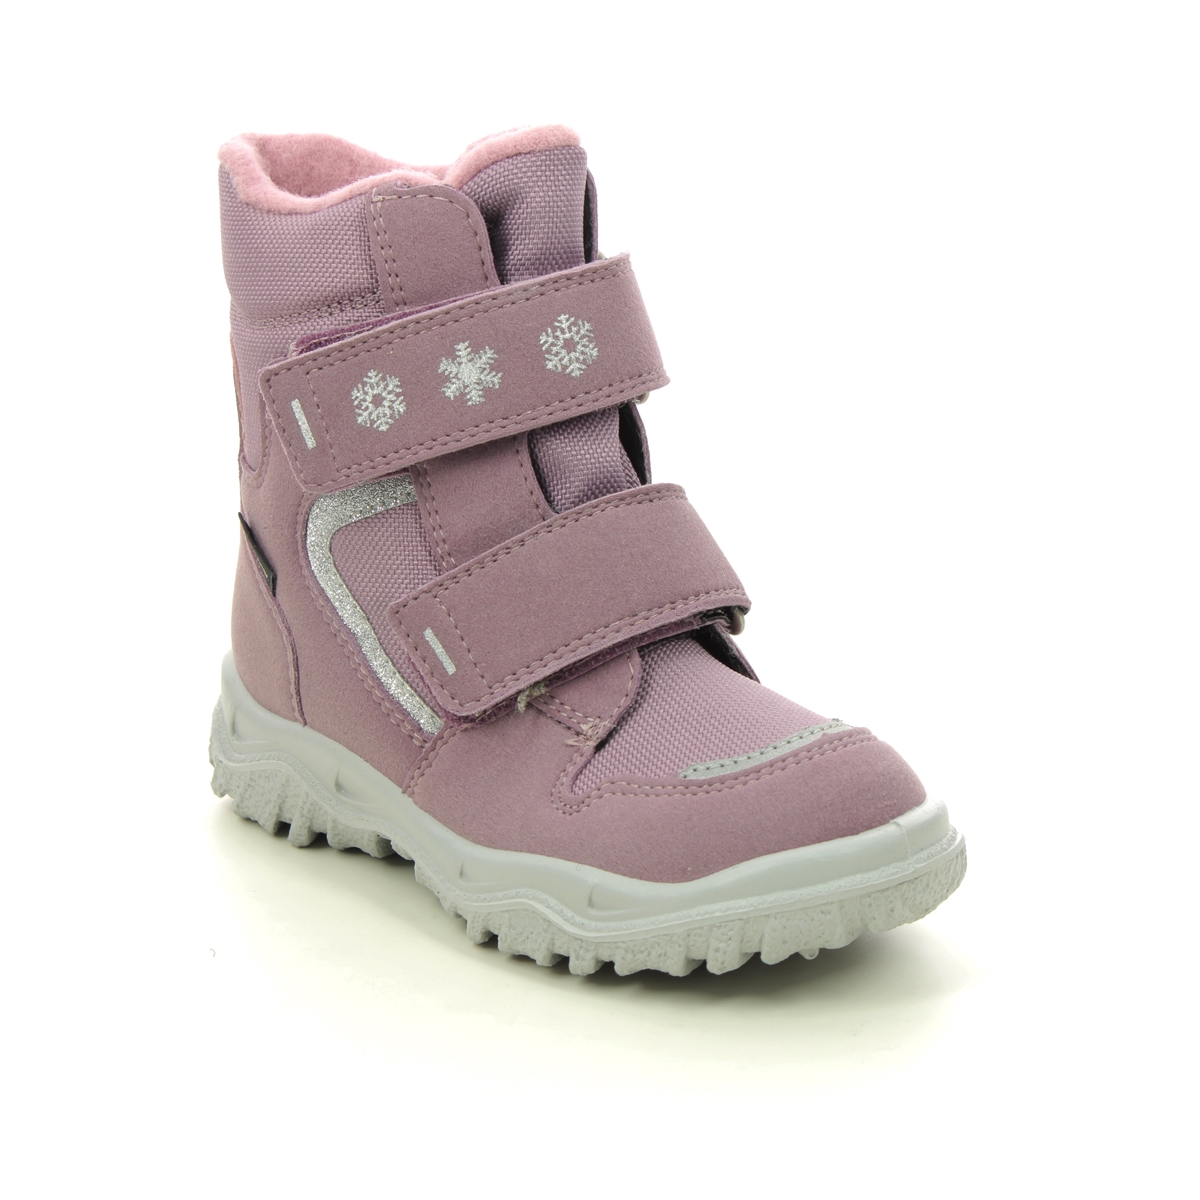 Superfit Husky  Inf Gtx Pink Leather Kids Toddler Girls Boots 1000045-8510 In Size 27 In Plain Pink Leather For kids